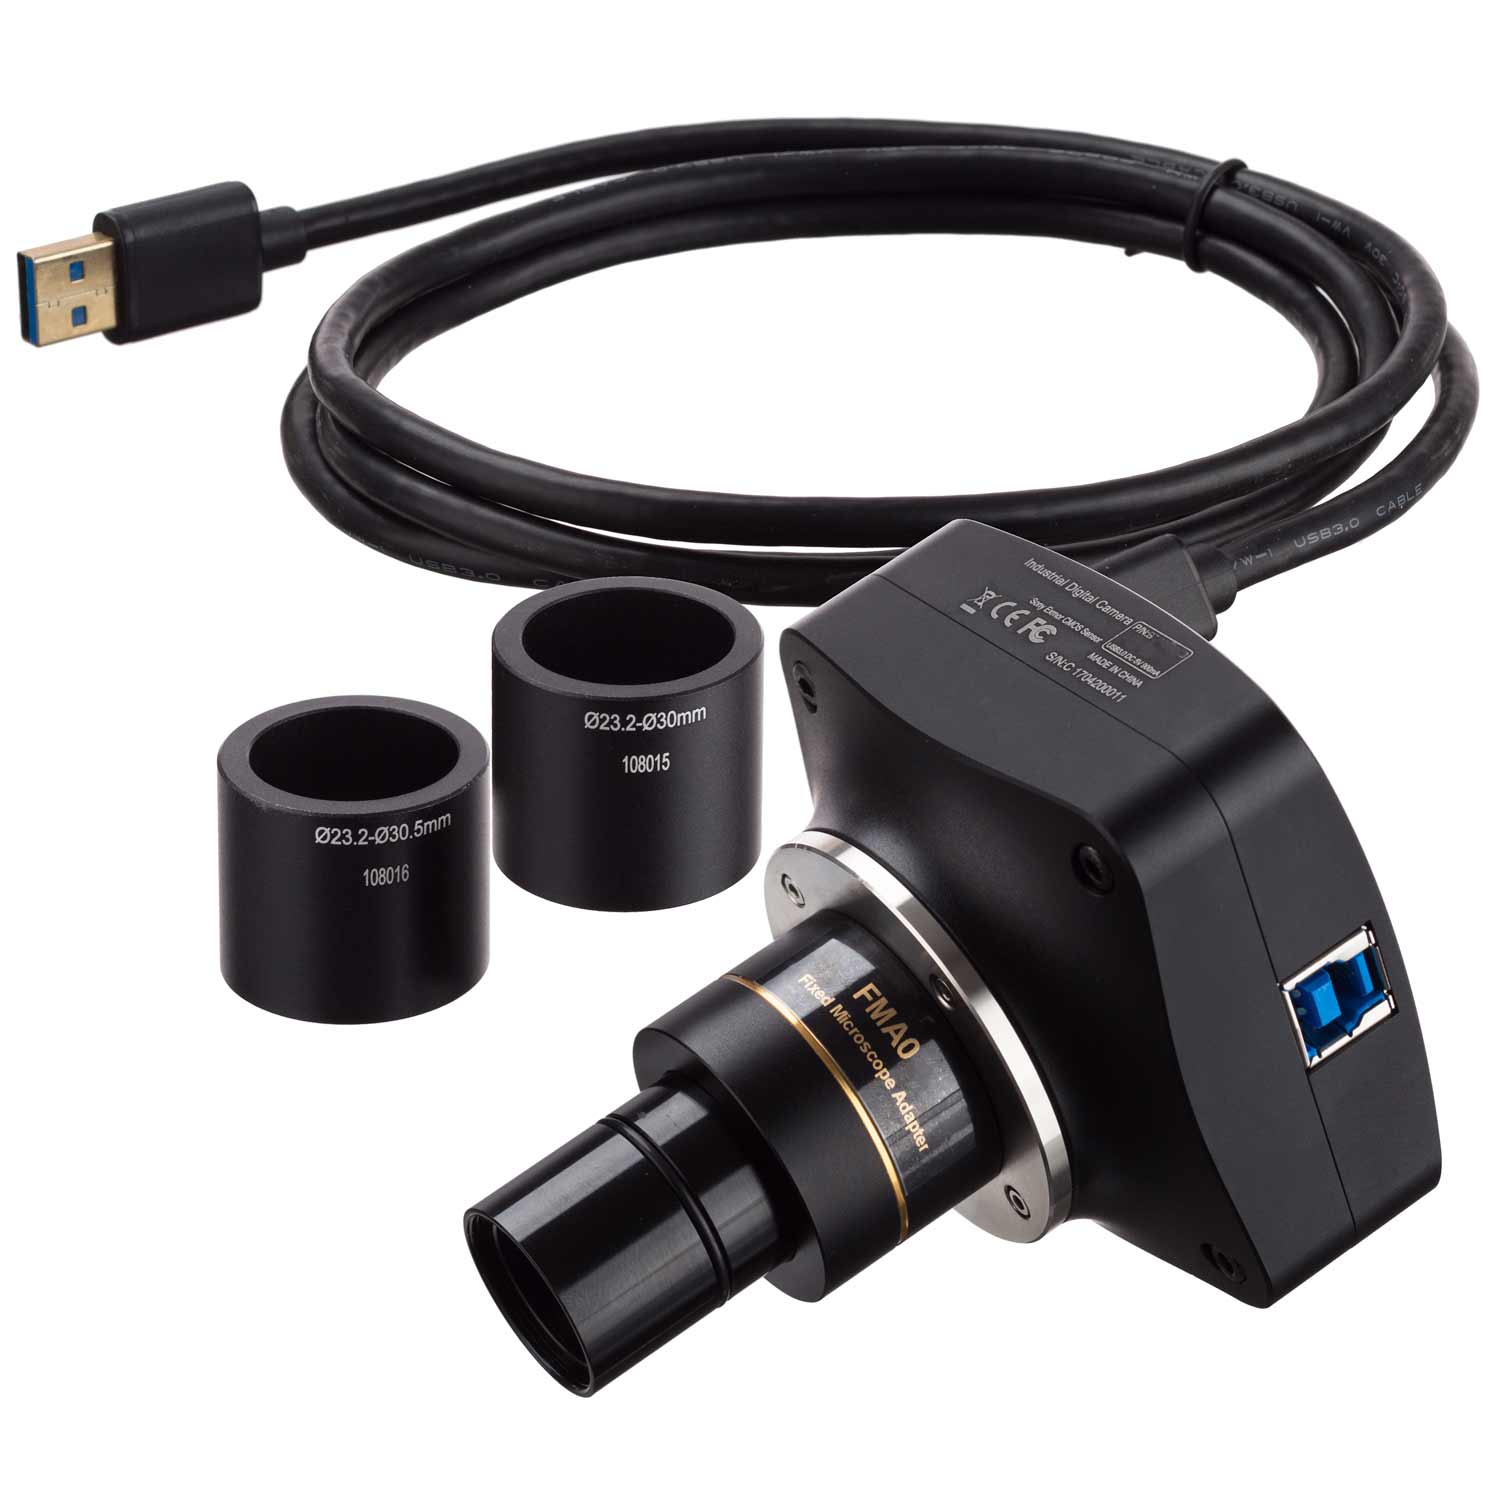 5.3MP USB 2.0 Back-illuminated Color CMOS C-Mount Microscope Camera with  Reduction Lens and Calibration Slide